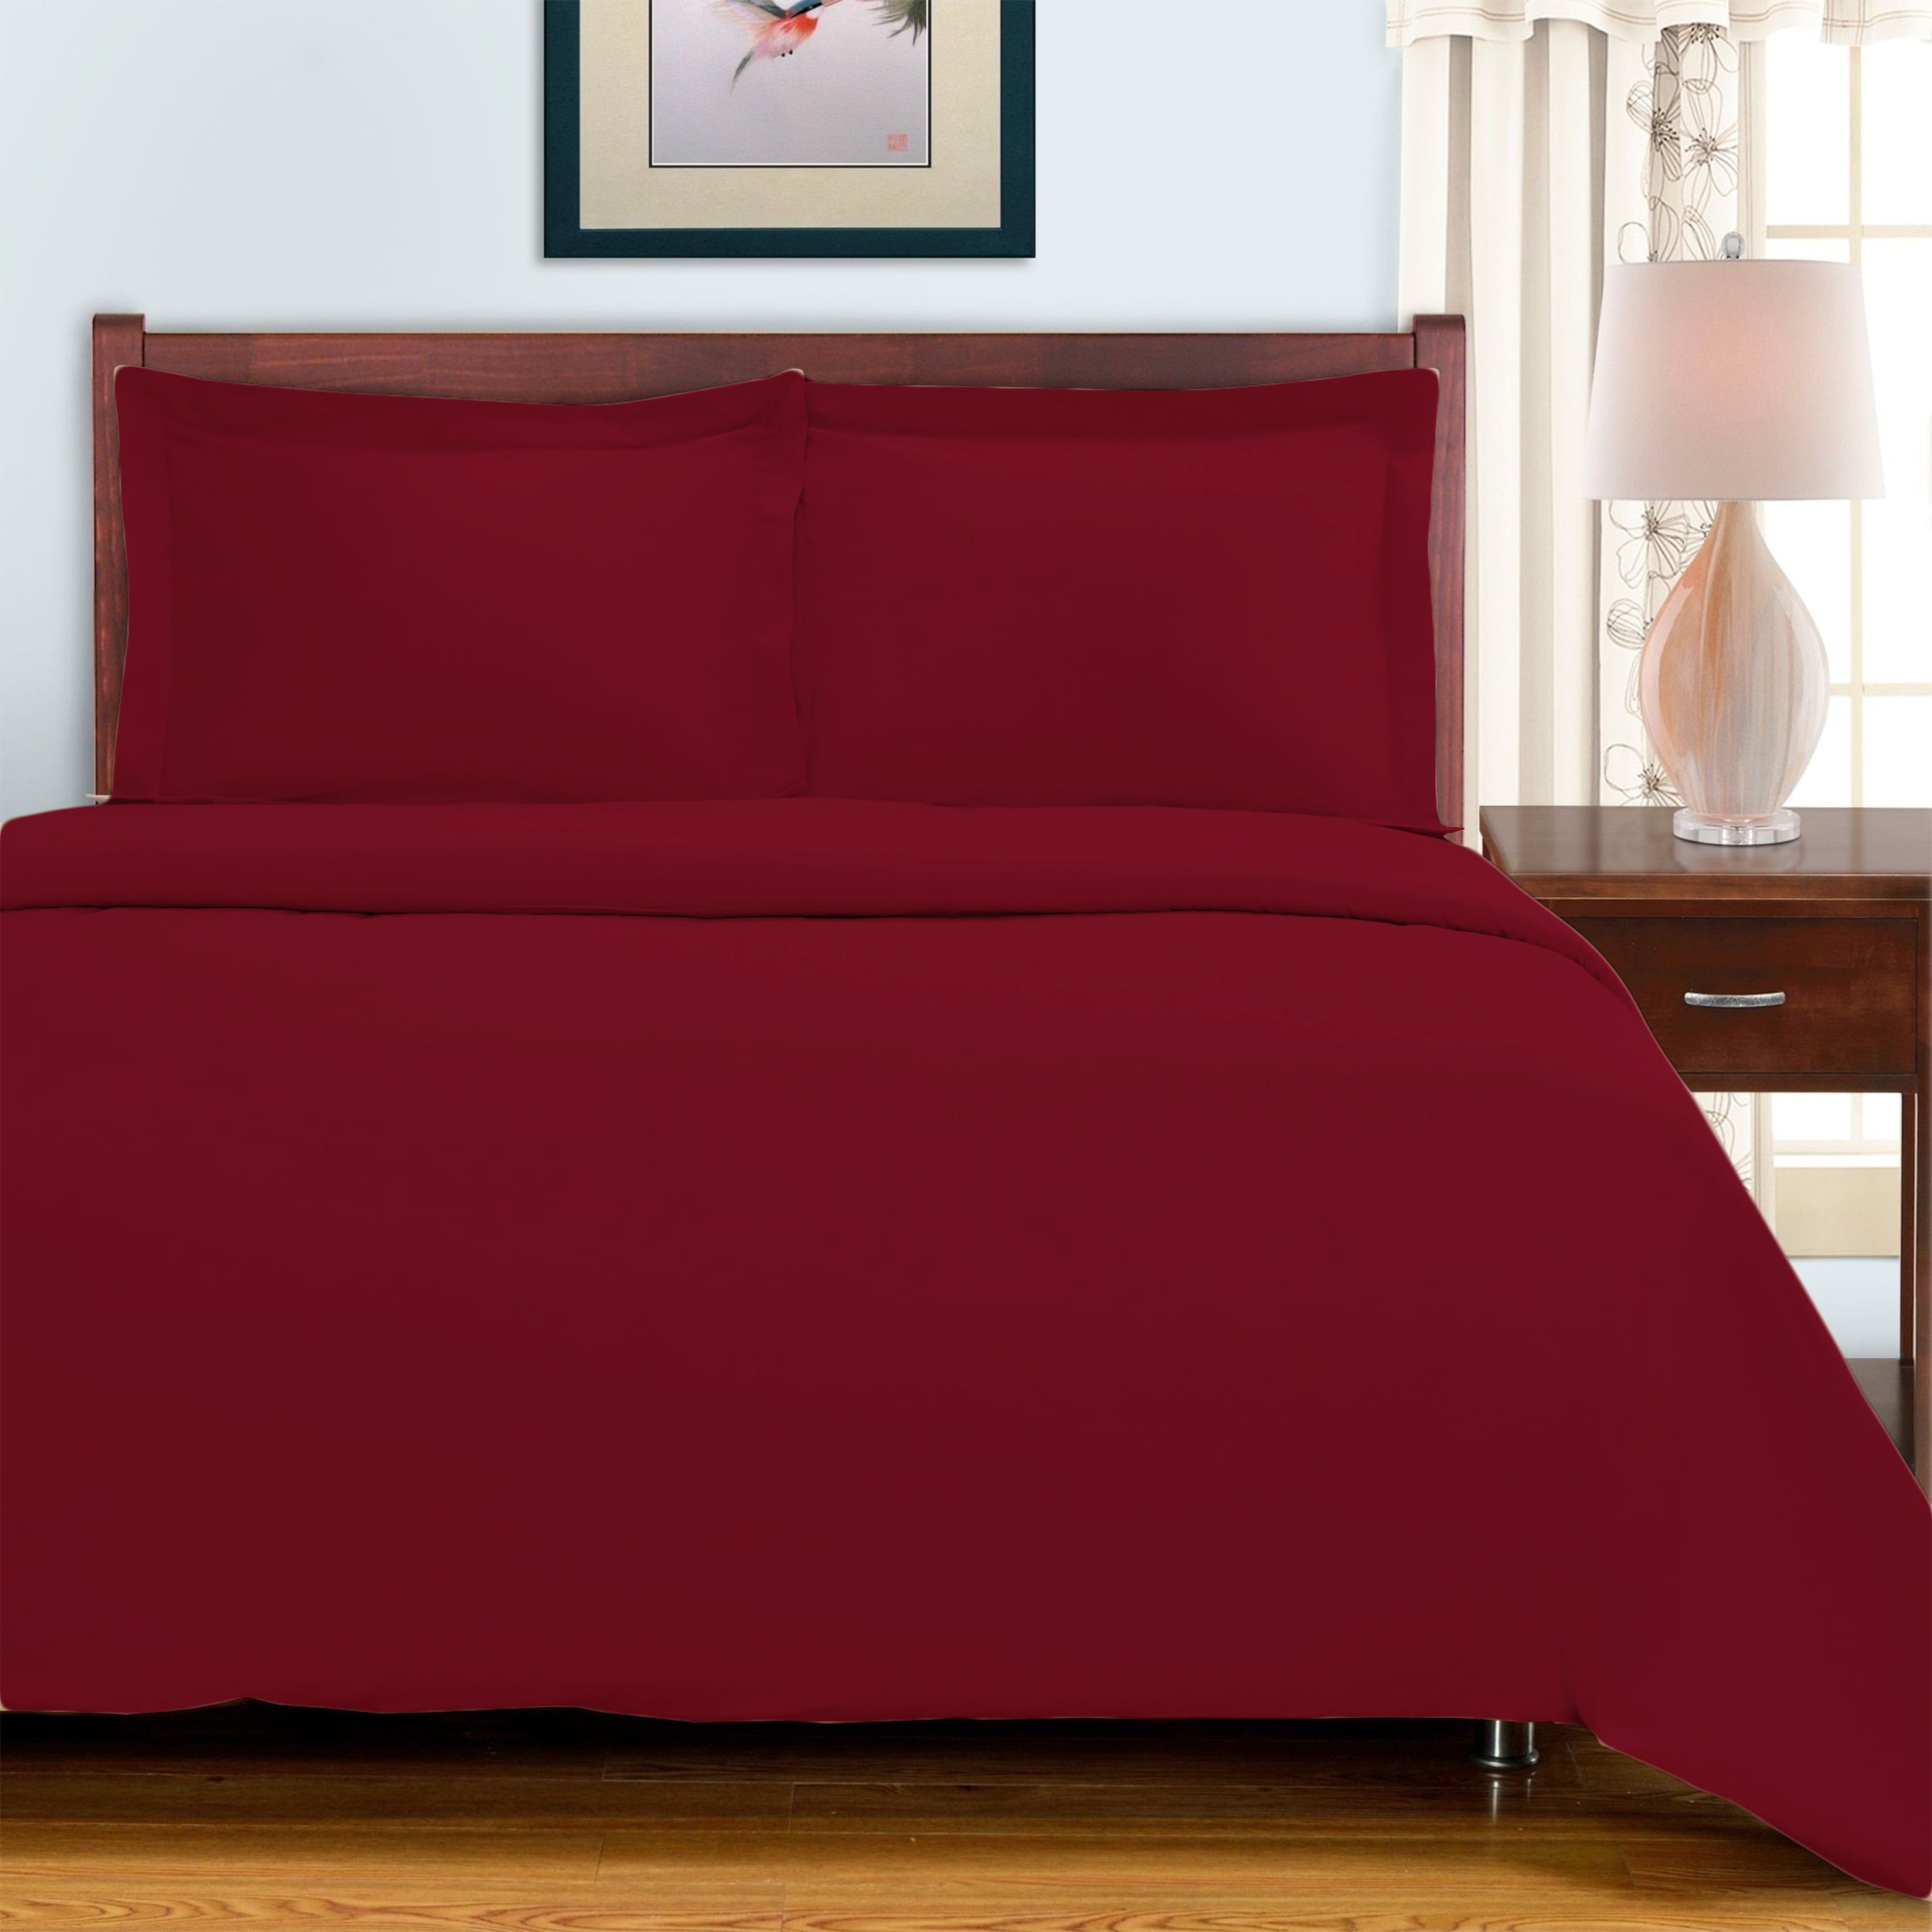 Details about   Luxury Bedding Items Queen Size 1000 Thread Count Egyptian Cotton Striped Colors 